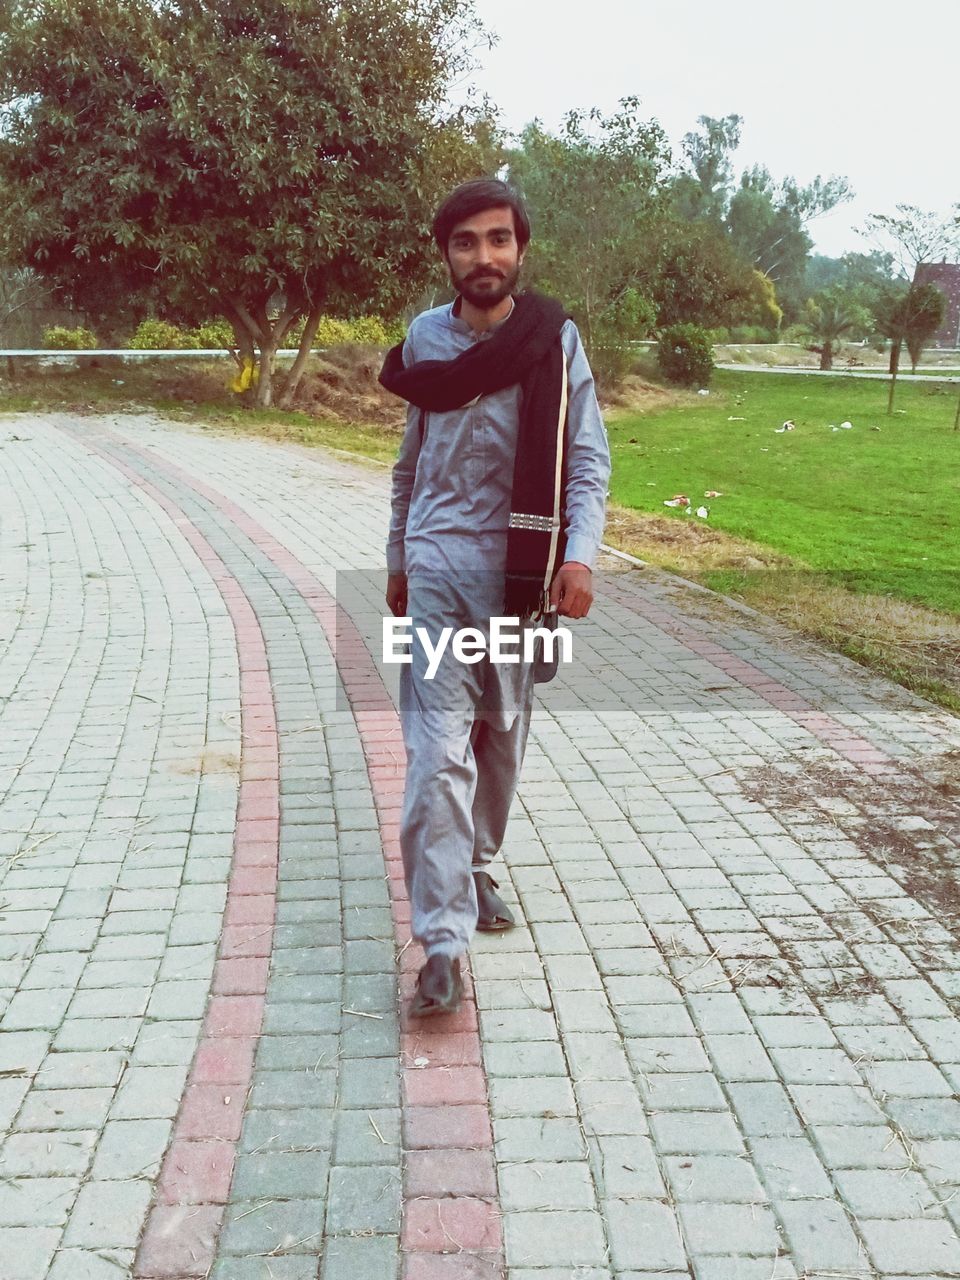 one person, full length, footpath, casual clothing, lifestyles, leisure activity, young adult, day, adult, front view, looking at camera, men, portrait, plant, nature, tree, walkway, outdoors, smiling, standing, clothing, sports, city, street, person, walking, footwear, happiness, emotion, architecture, paving stone, fashion